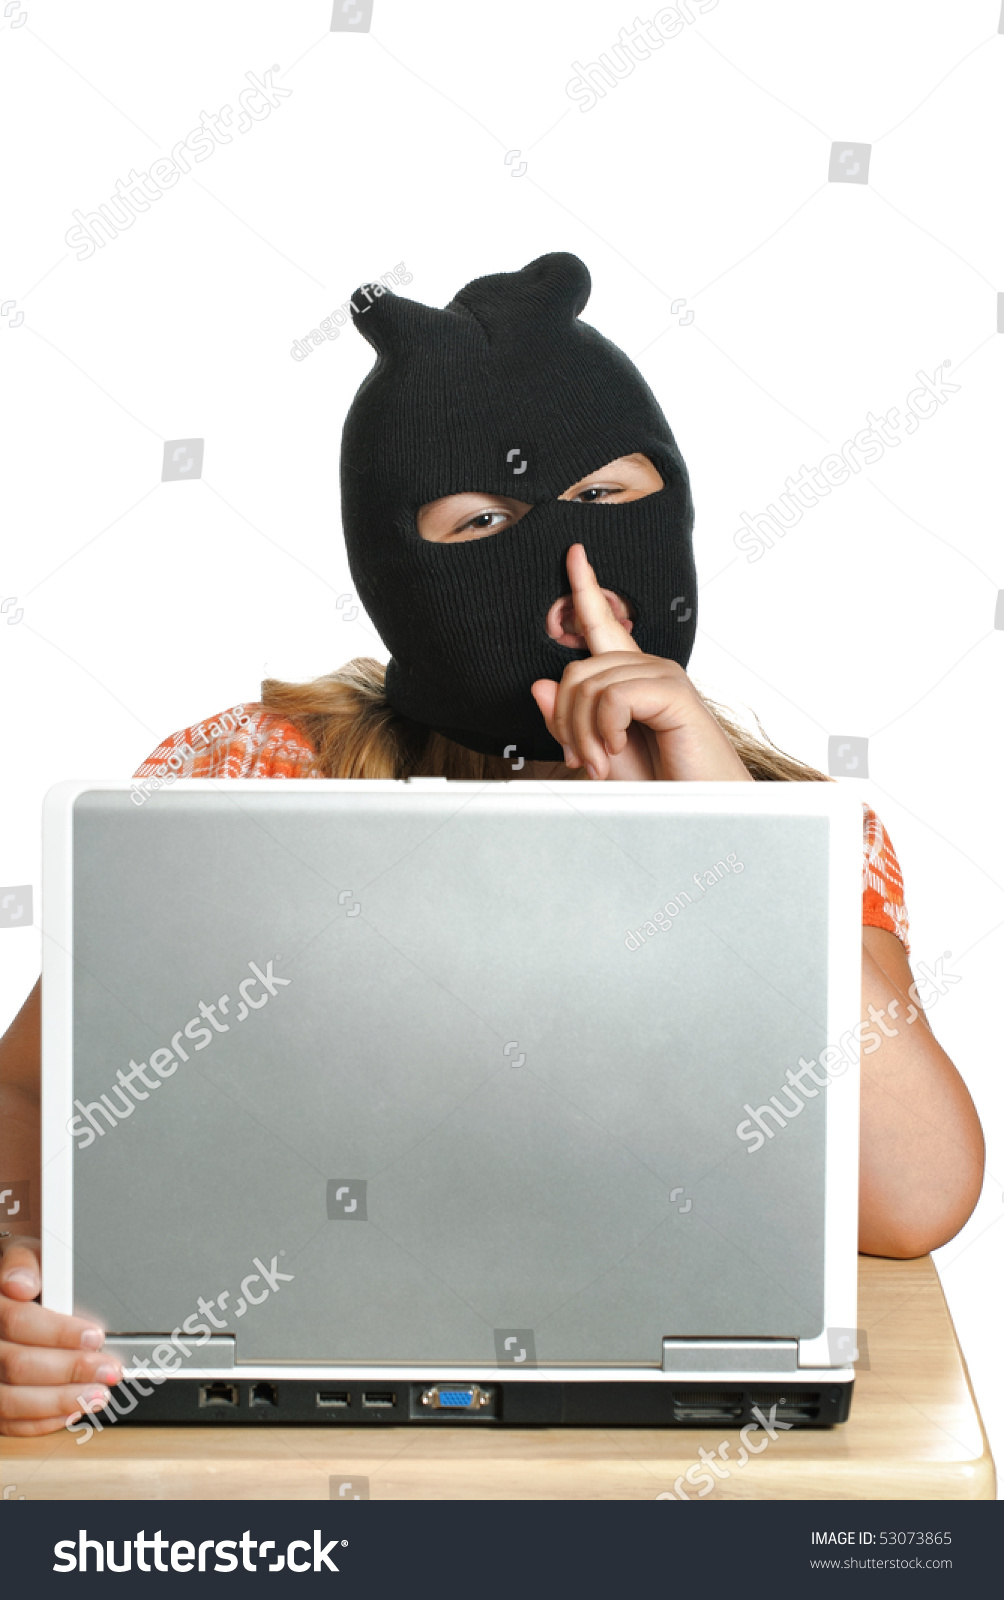 stock-photo-a-young-child-hacker-is-work